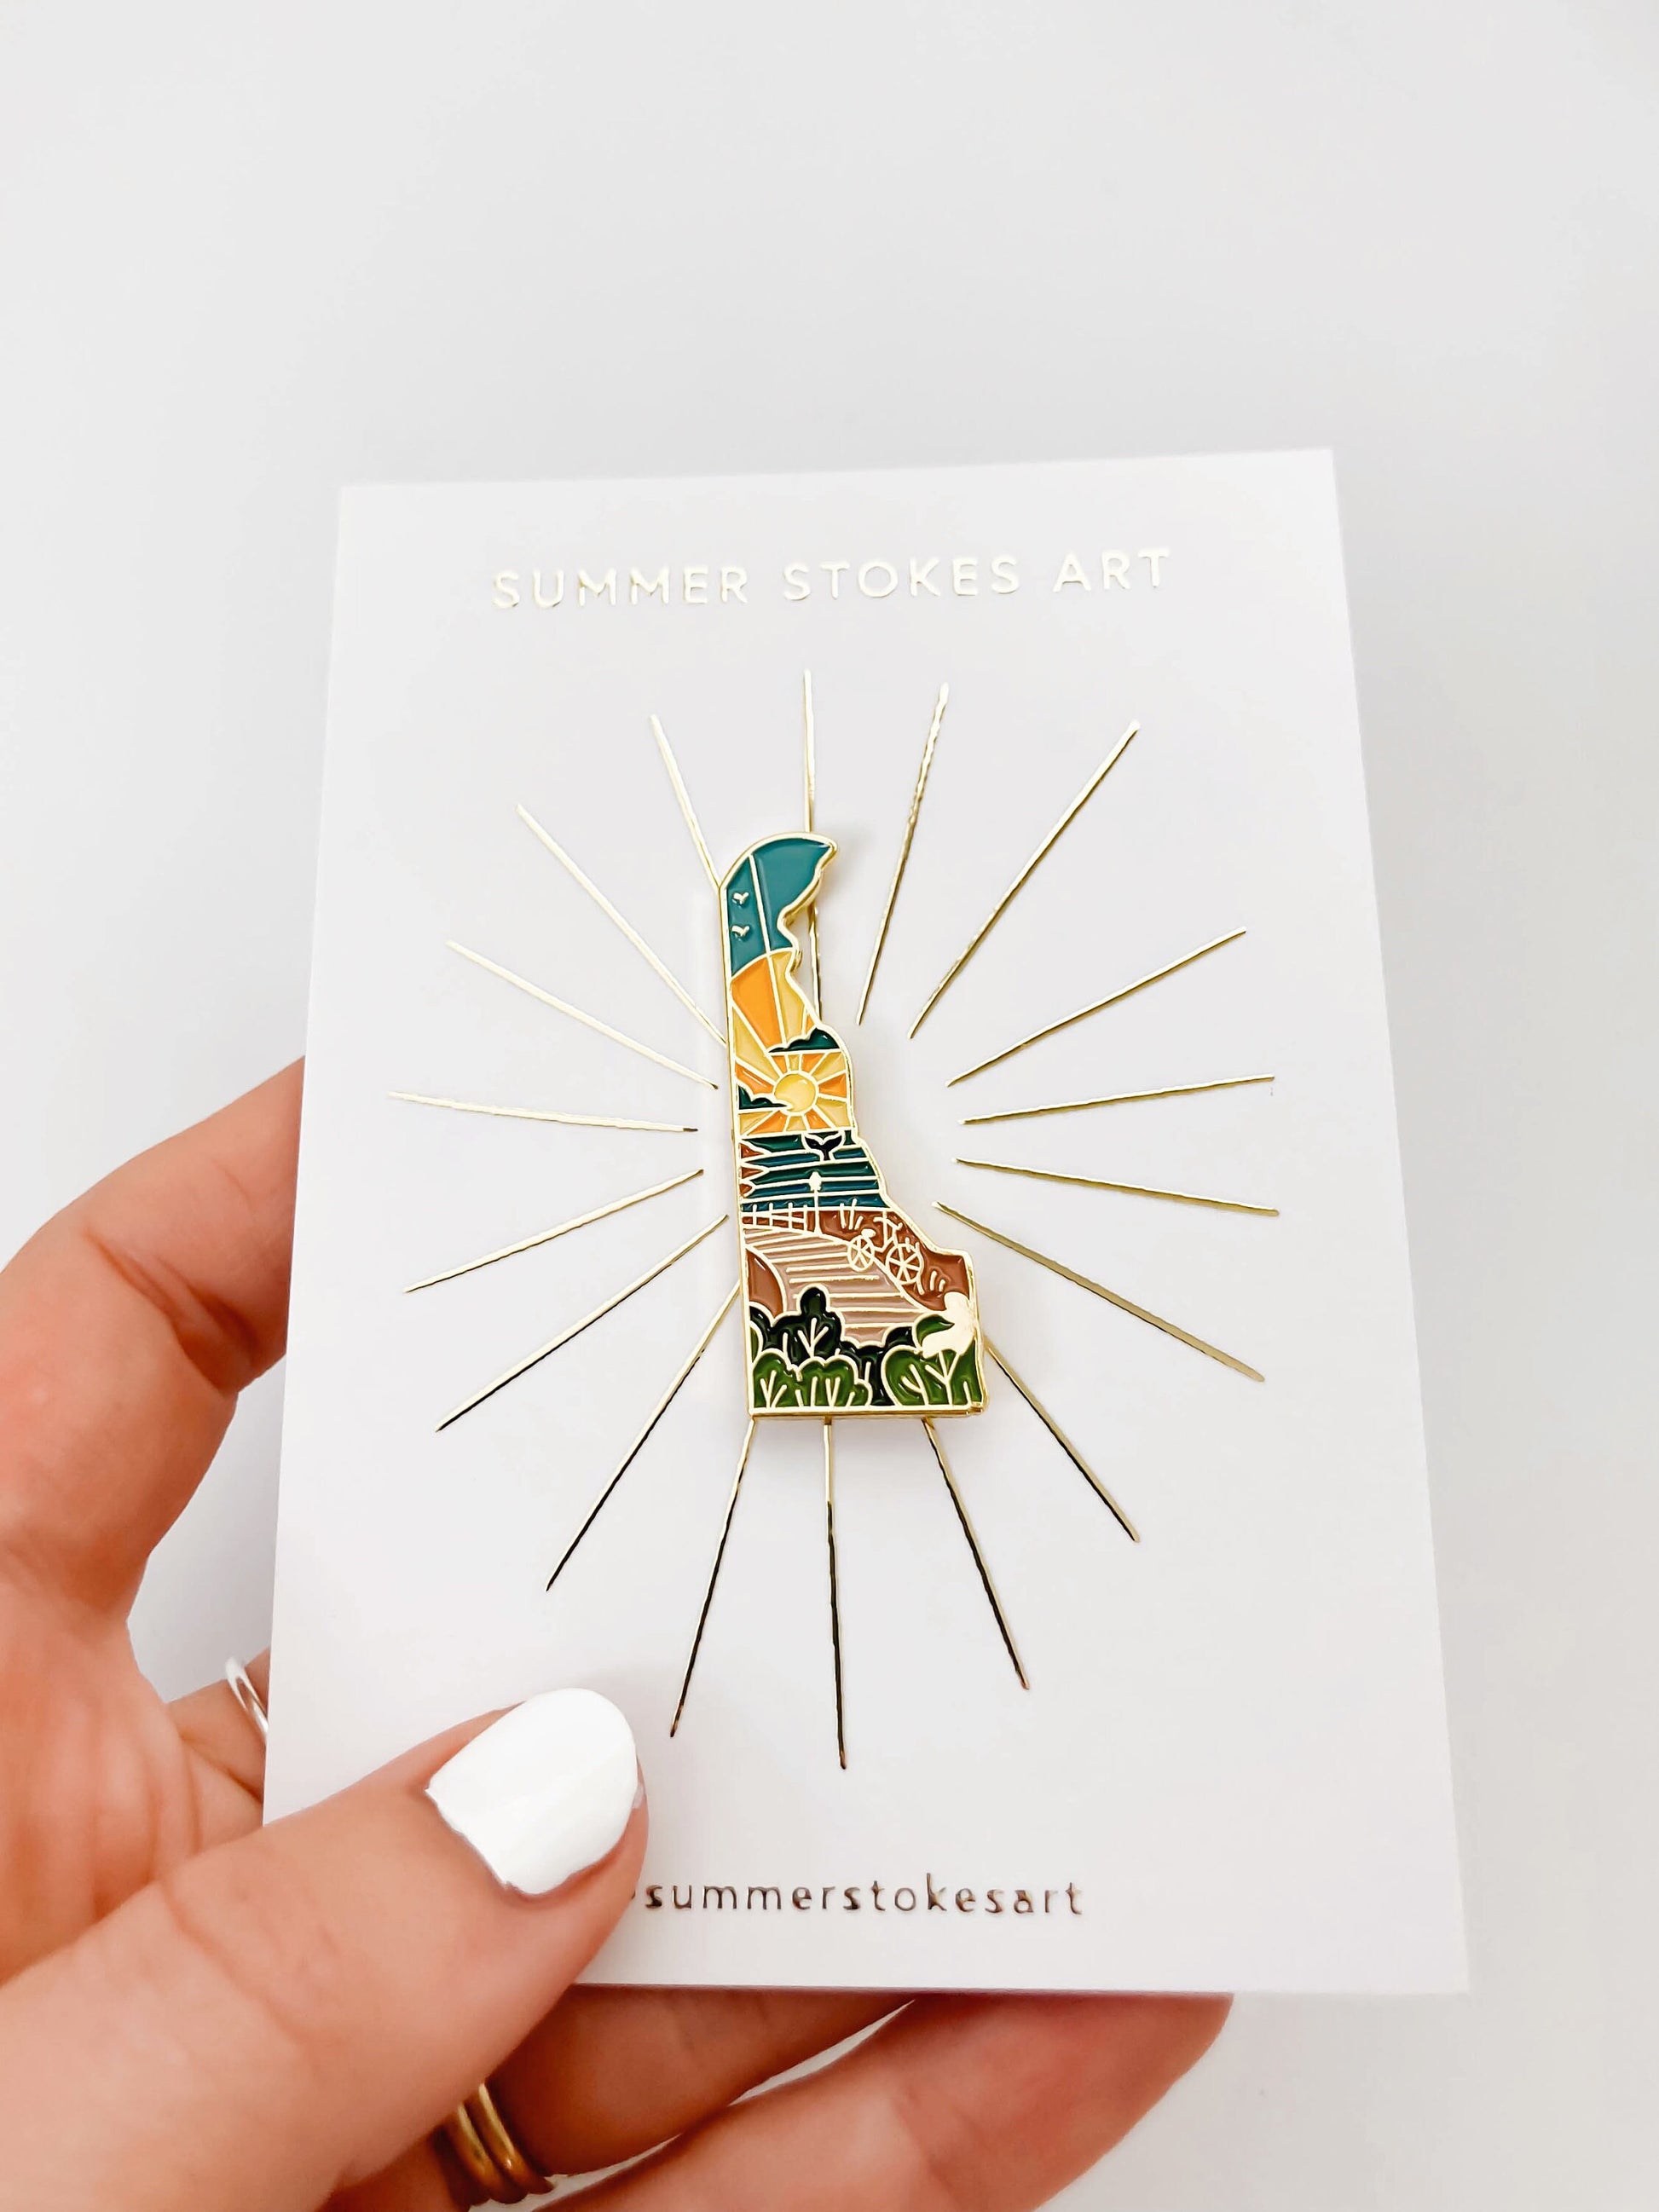 Gold Delaware Enamel Pin | Delaware Outline Pin | Illustrated State Pin | Butterfly Clasp | 1"